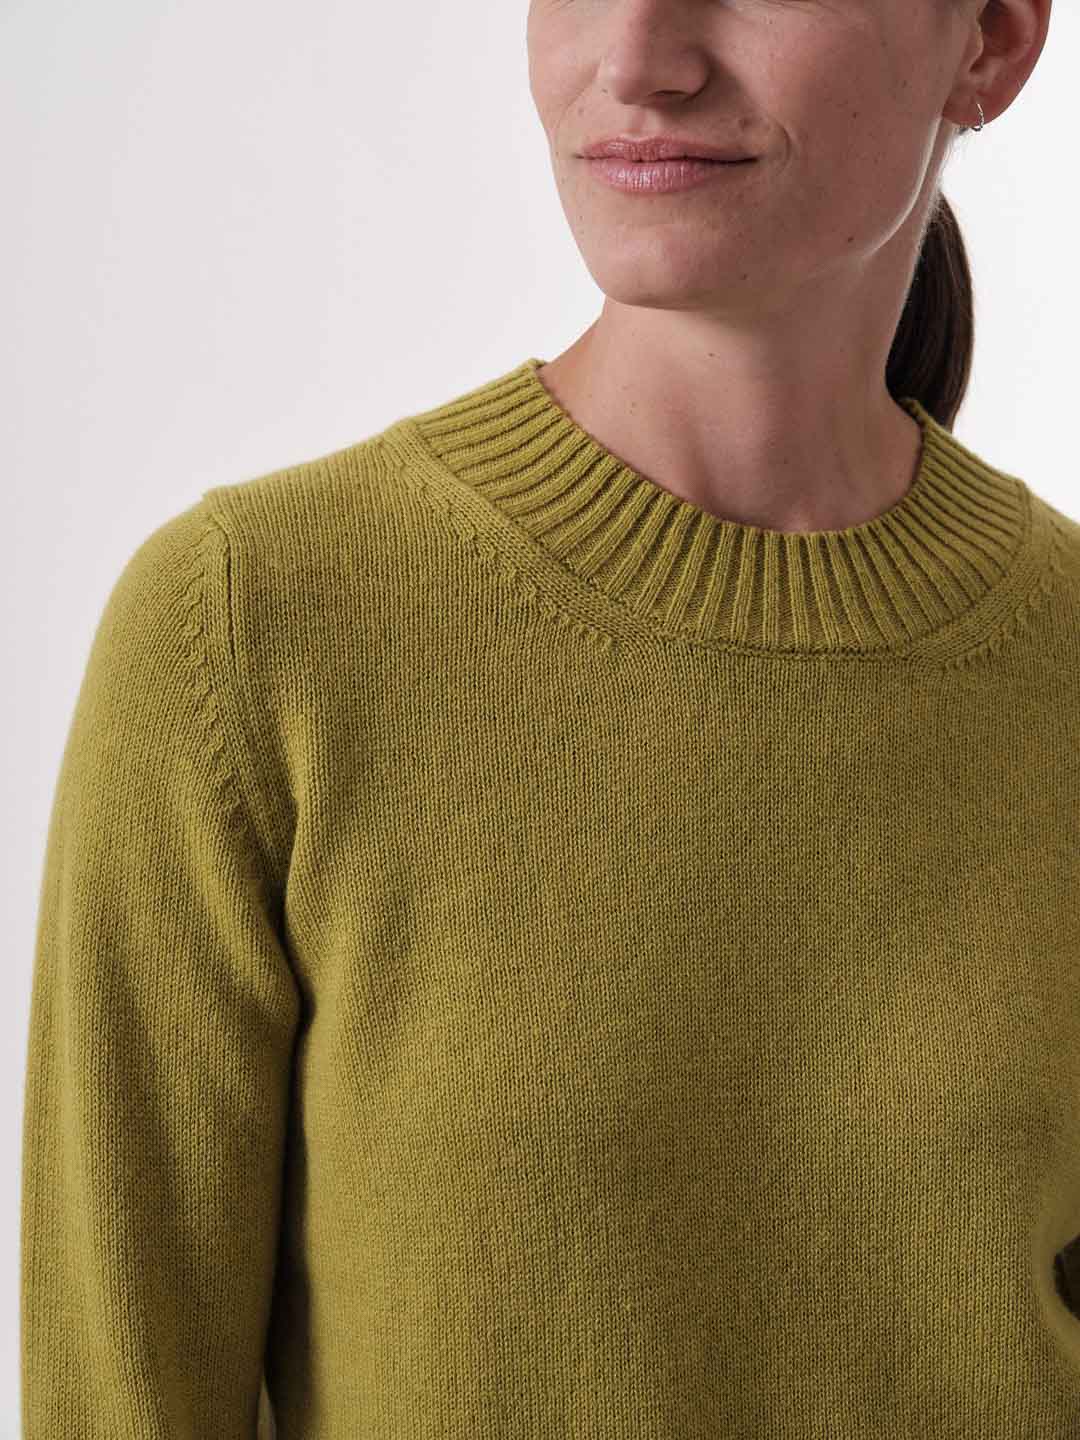 Pullover golden olive (100% Wolle)